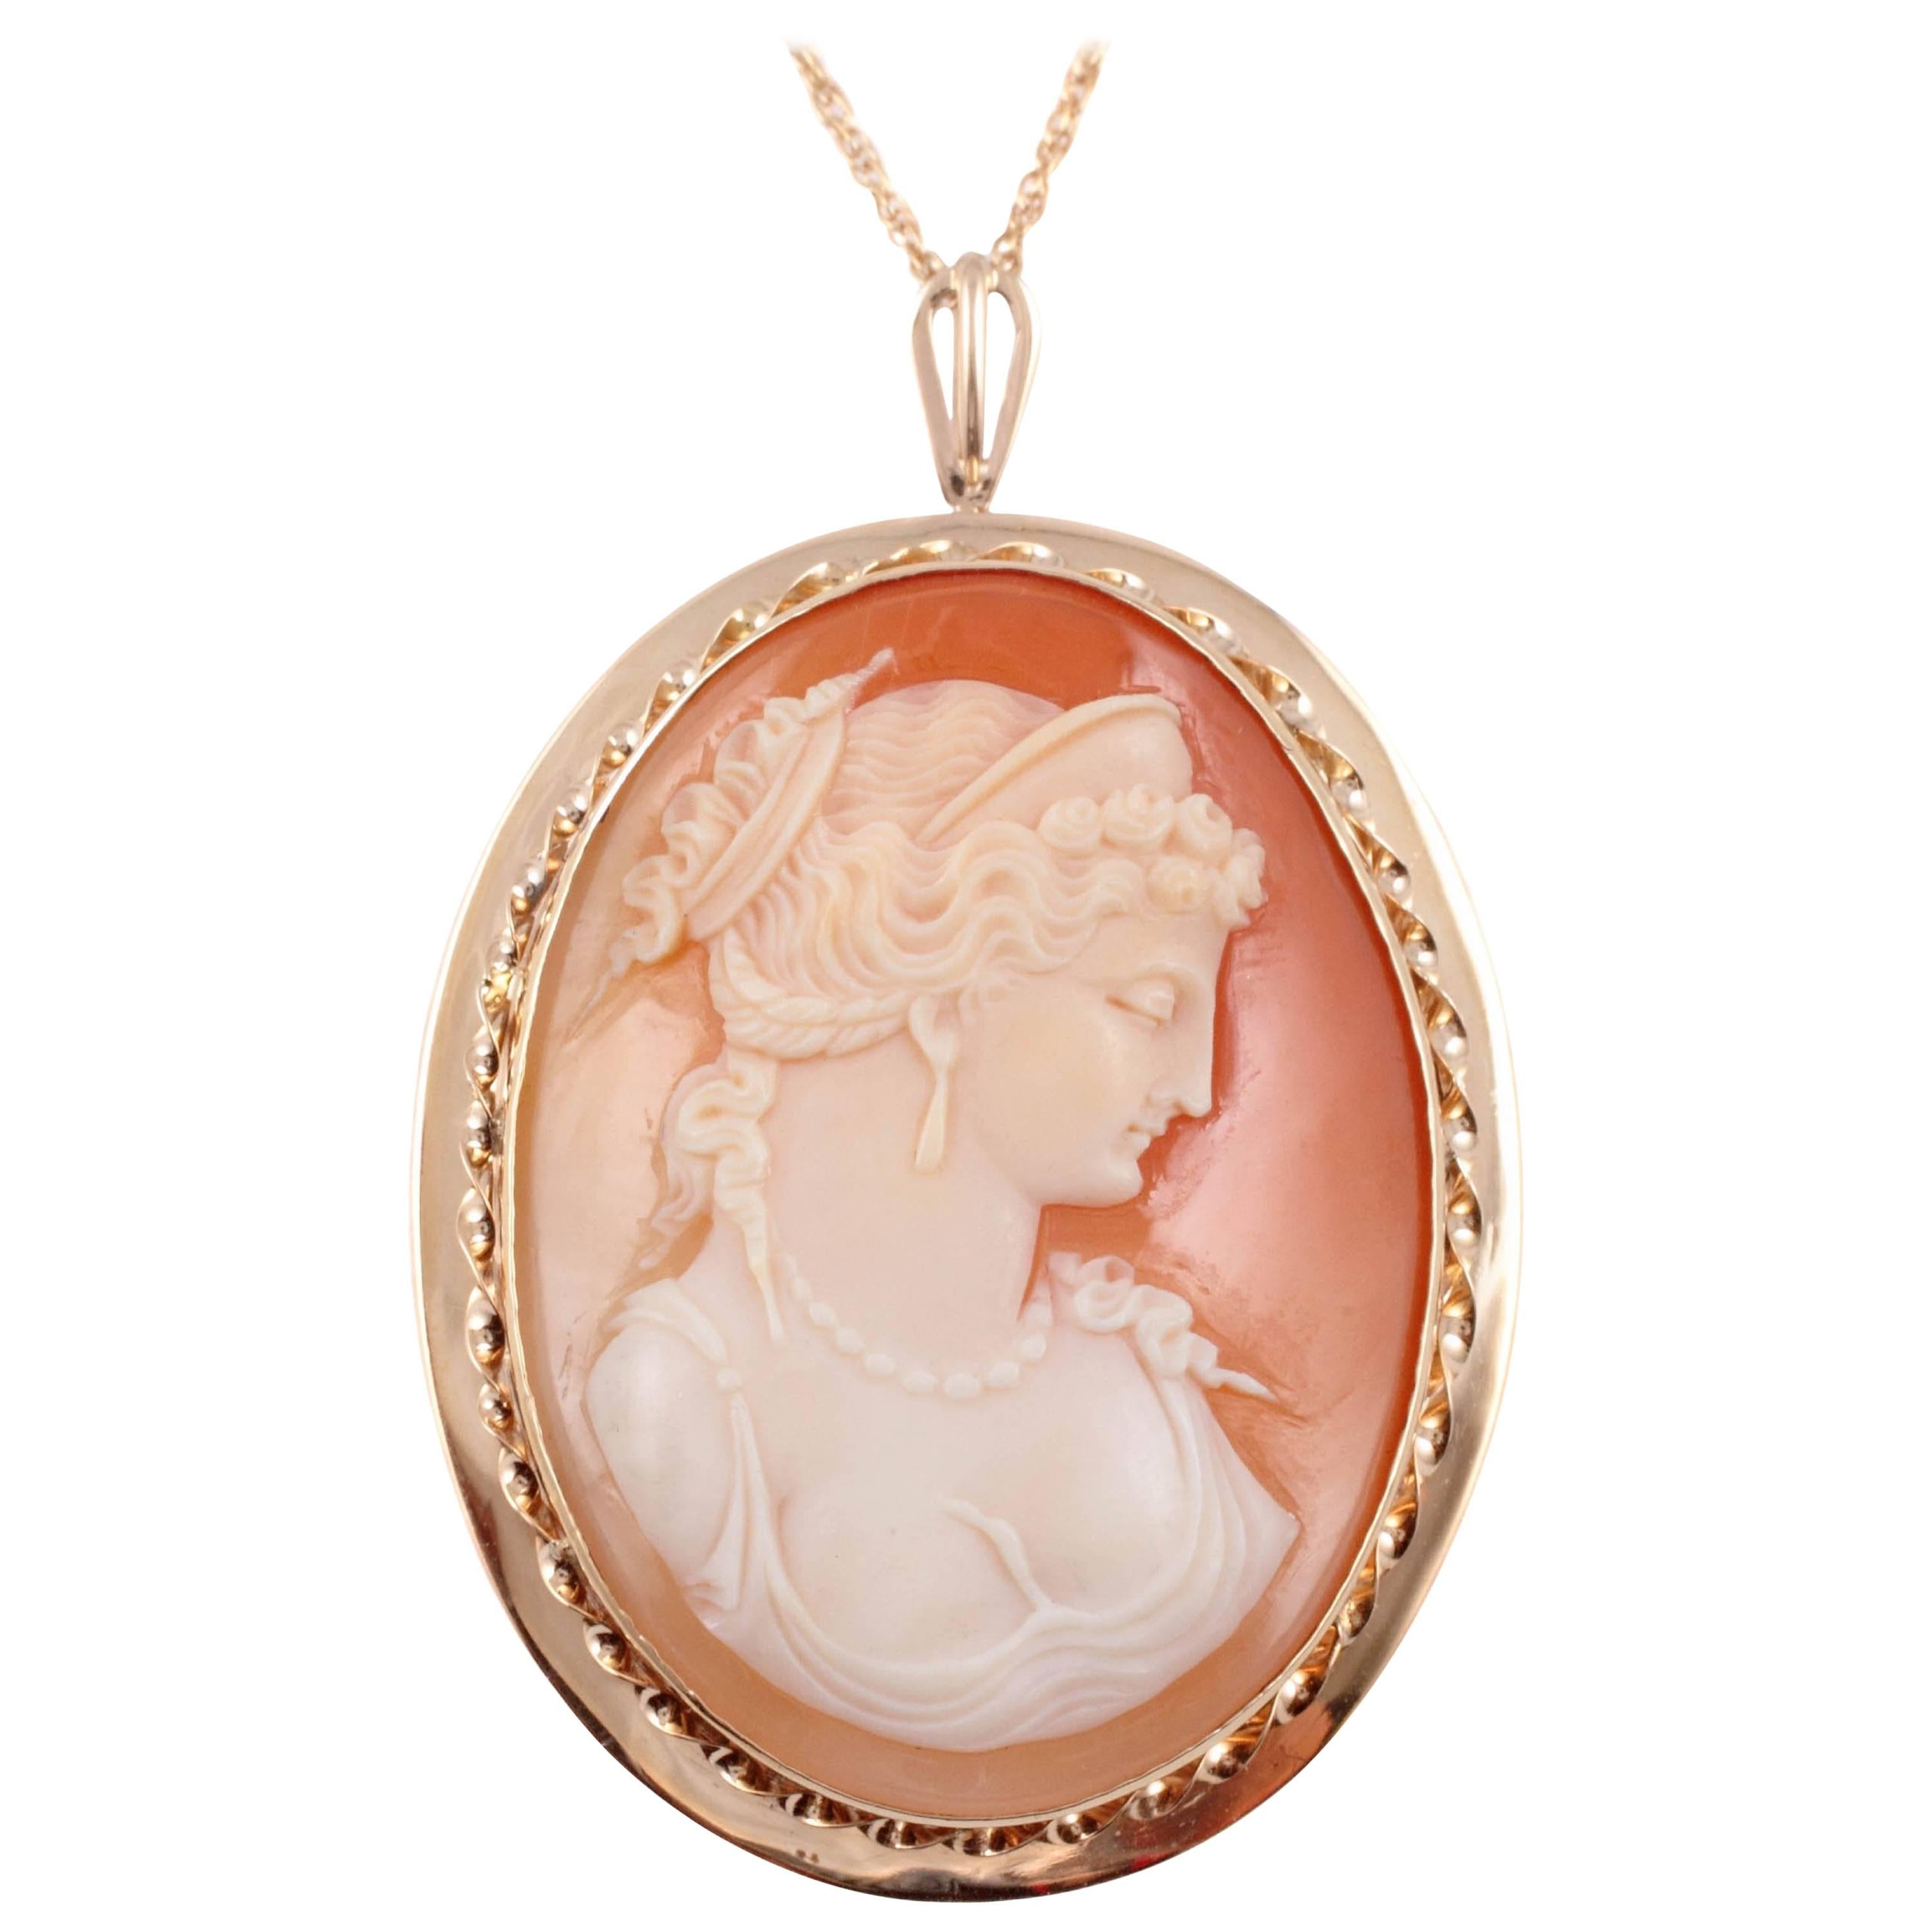 Gold Cameo Pin Pendant on Gold Filled Chain